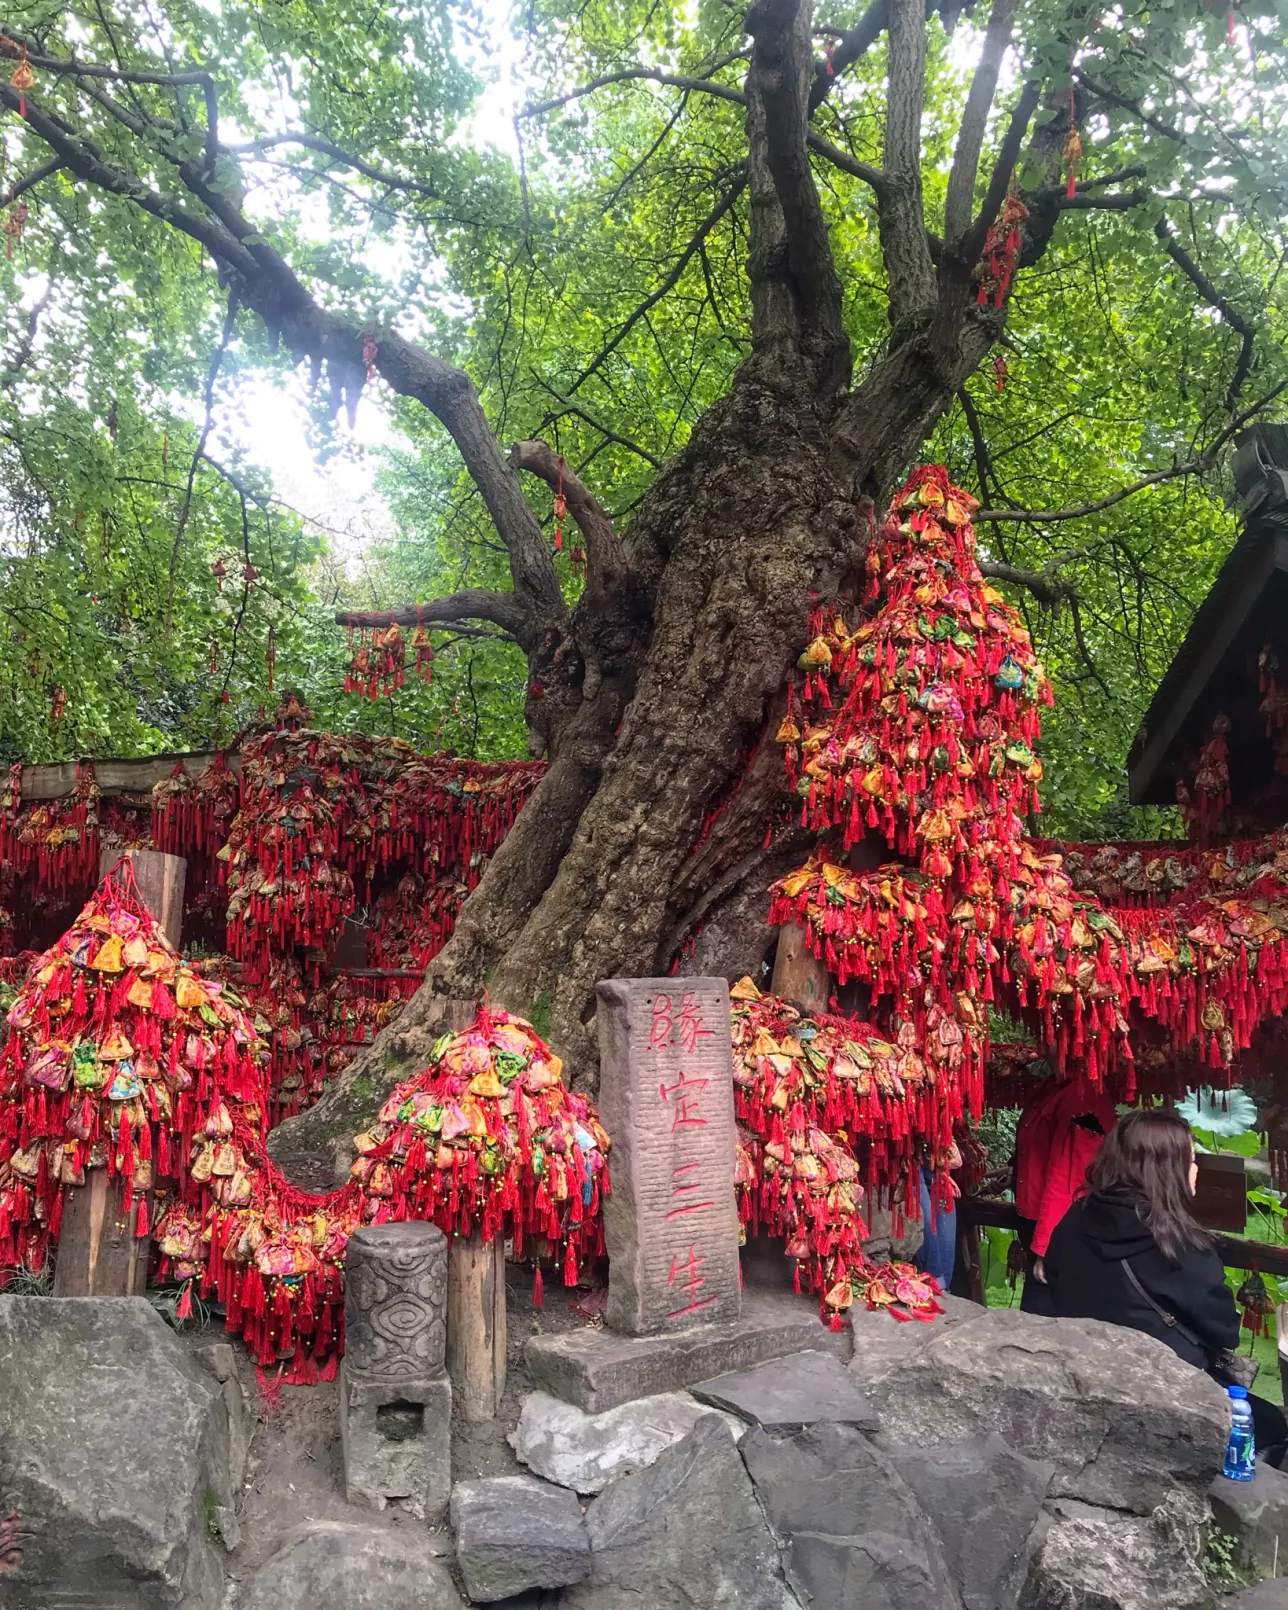 Old tree filled with red religious artifacts in park in China. Photo.